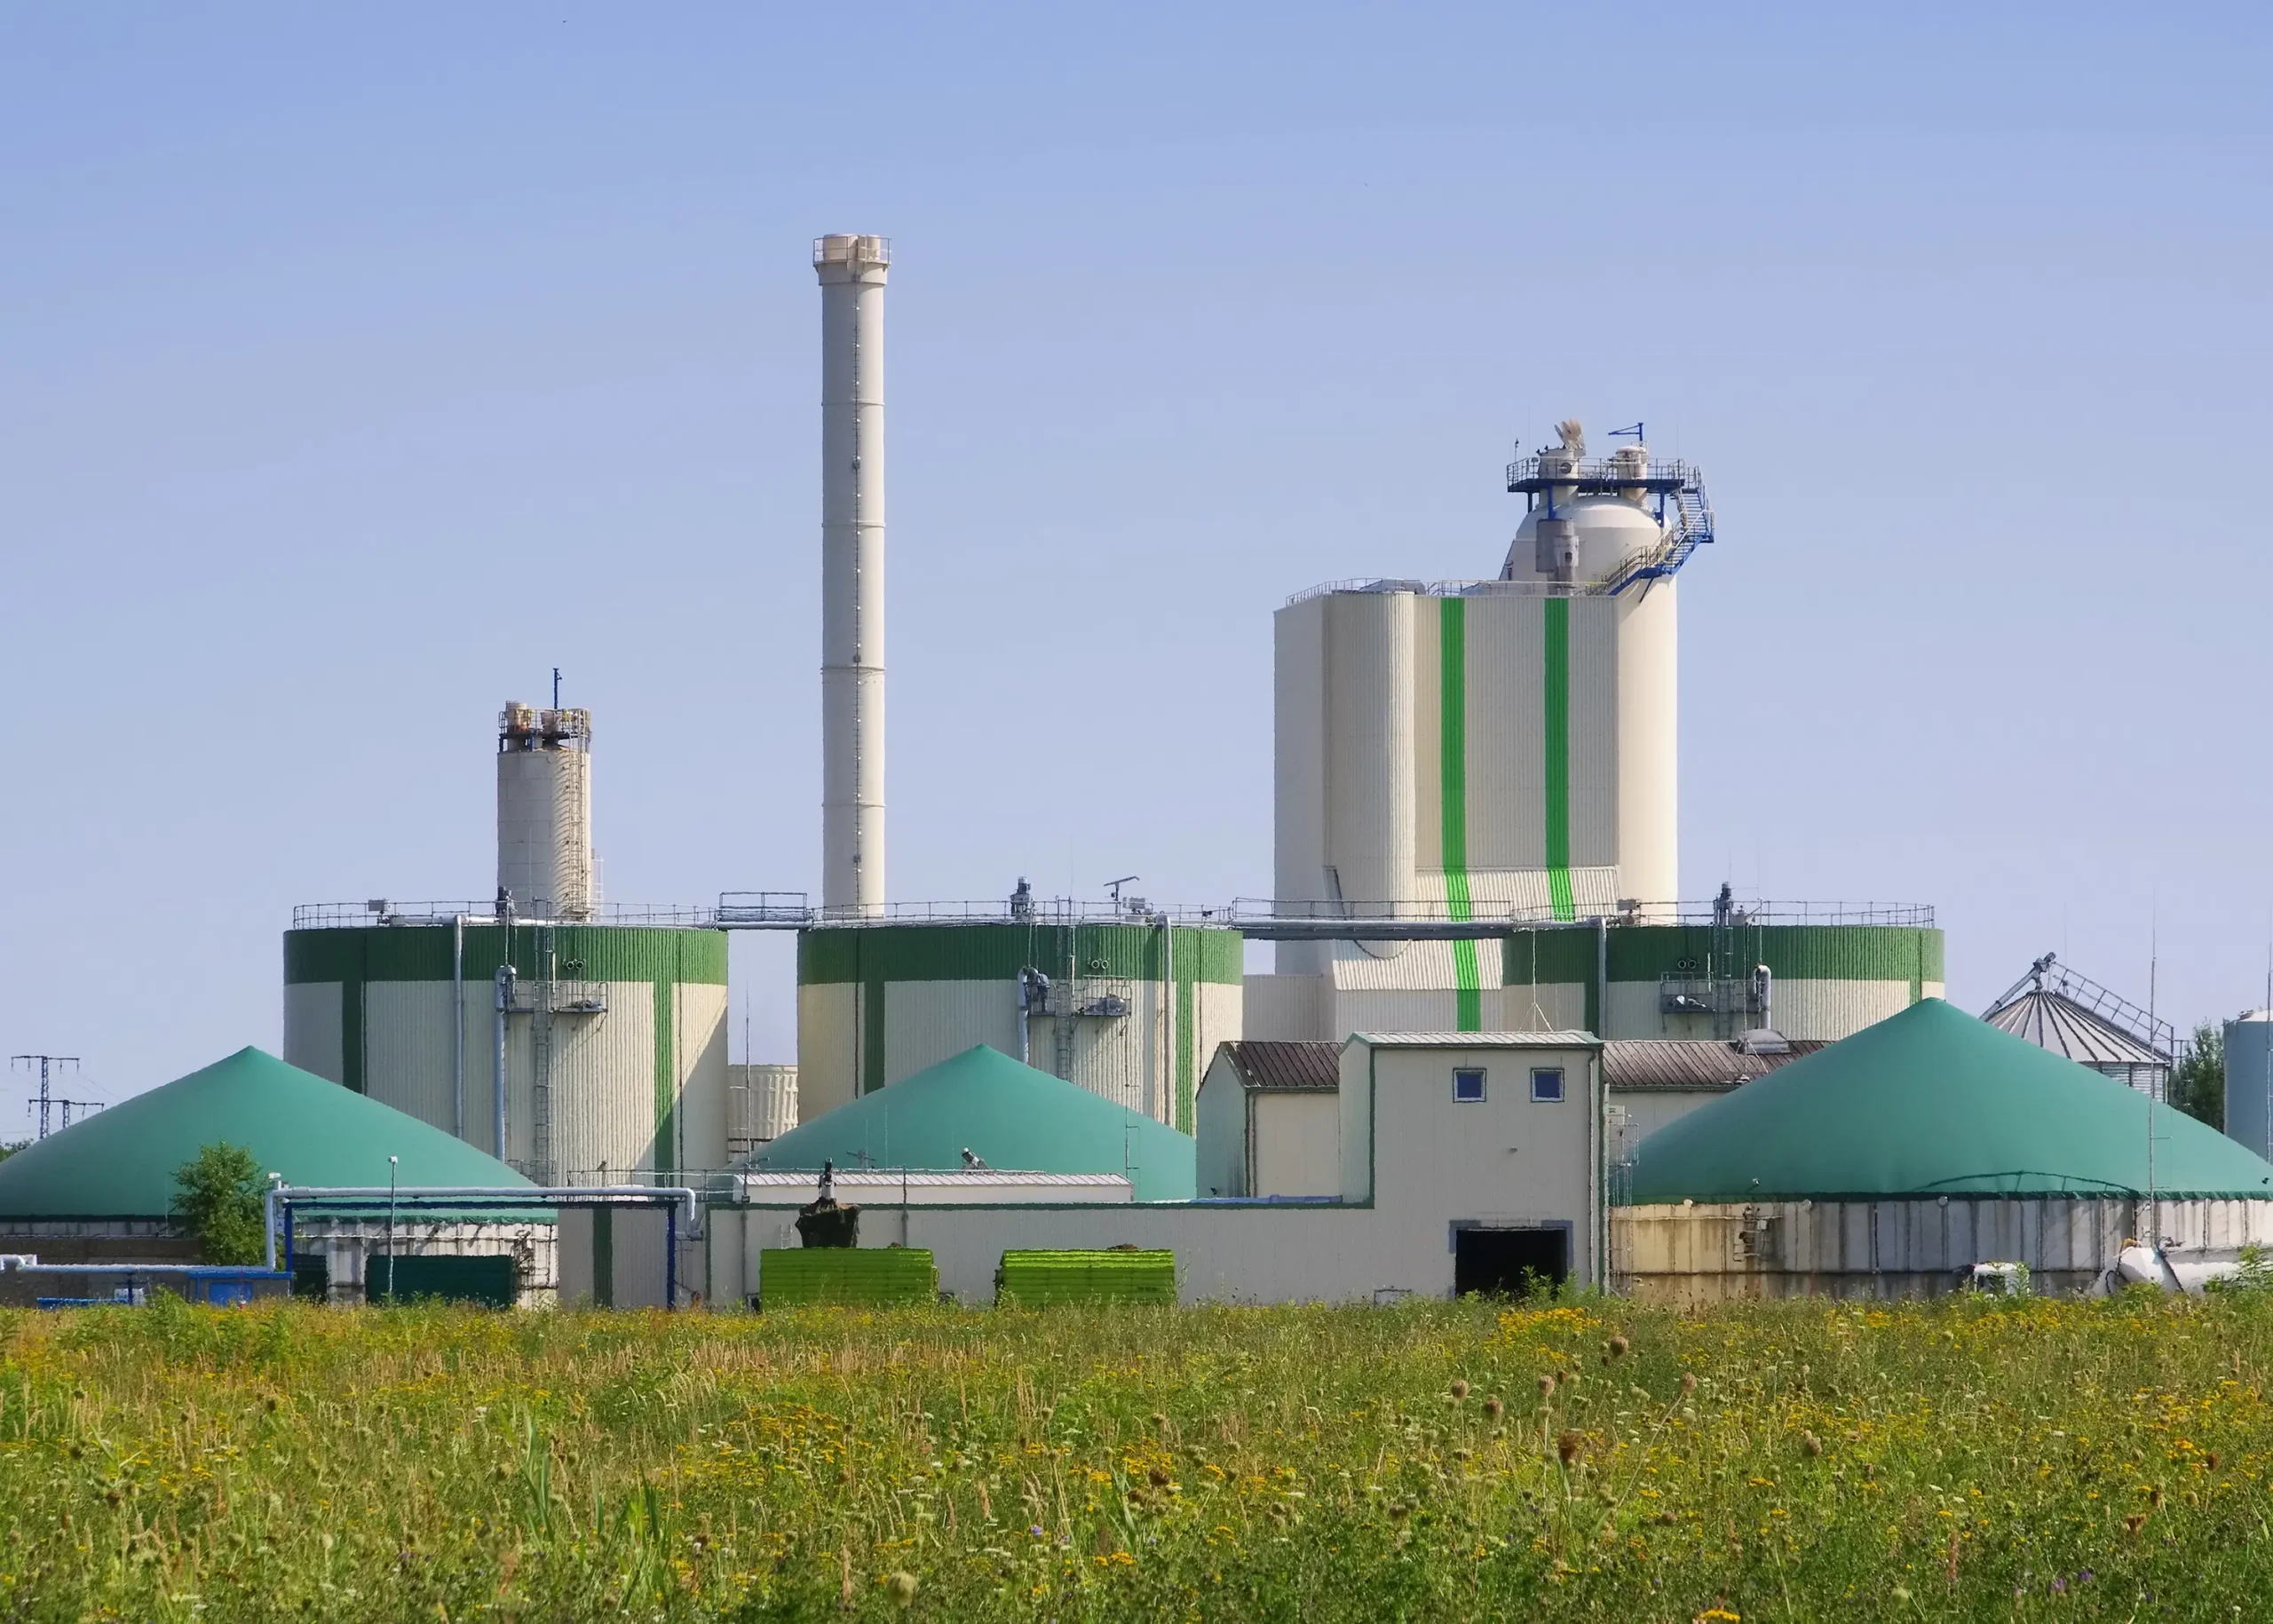 The harmonious combination of green fields and the renewable biomass power plant conceals the indispensable control valves responsible for efficient energy generation from sustainable sources.